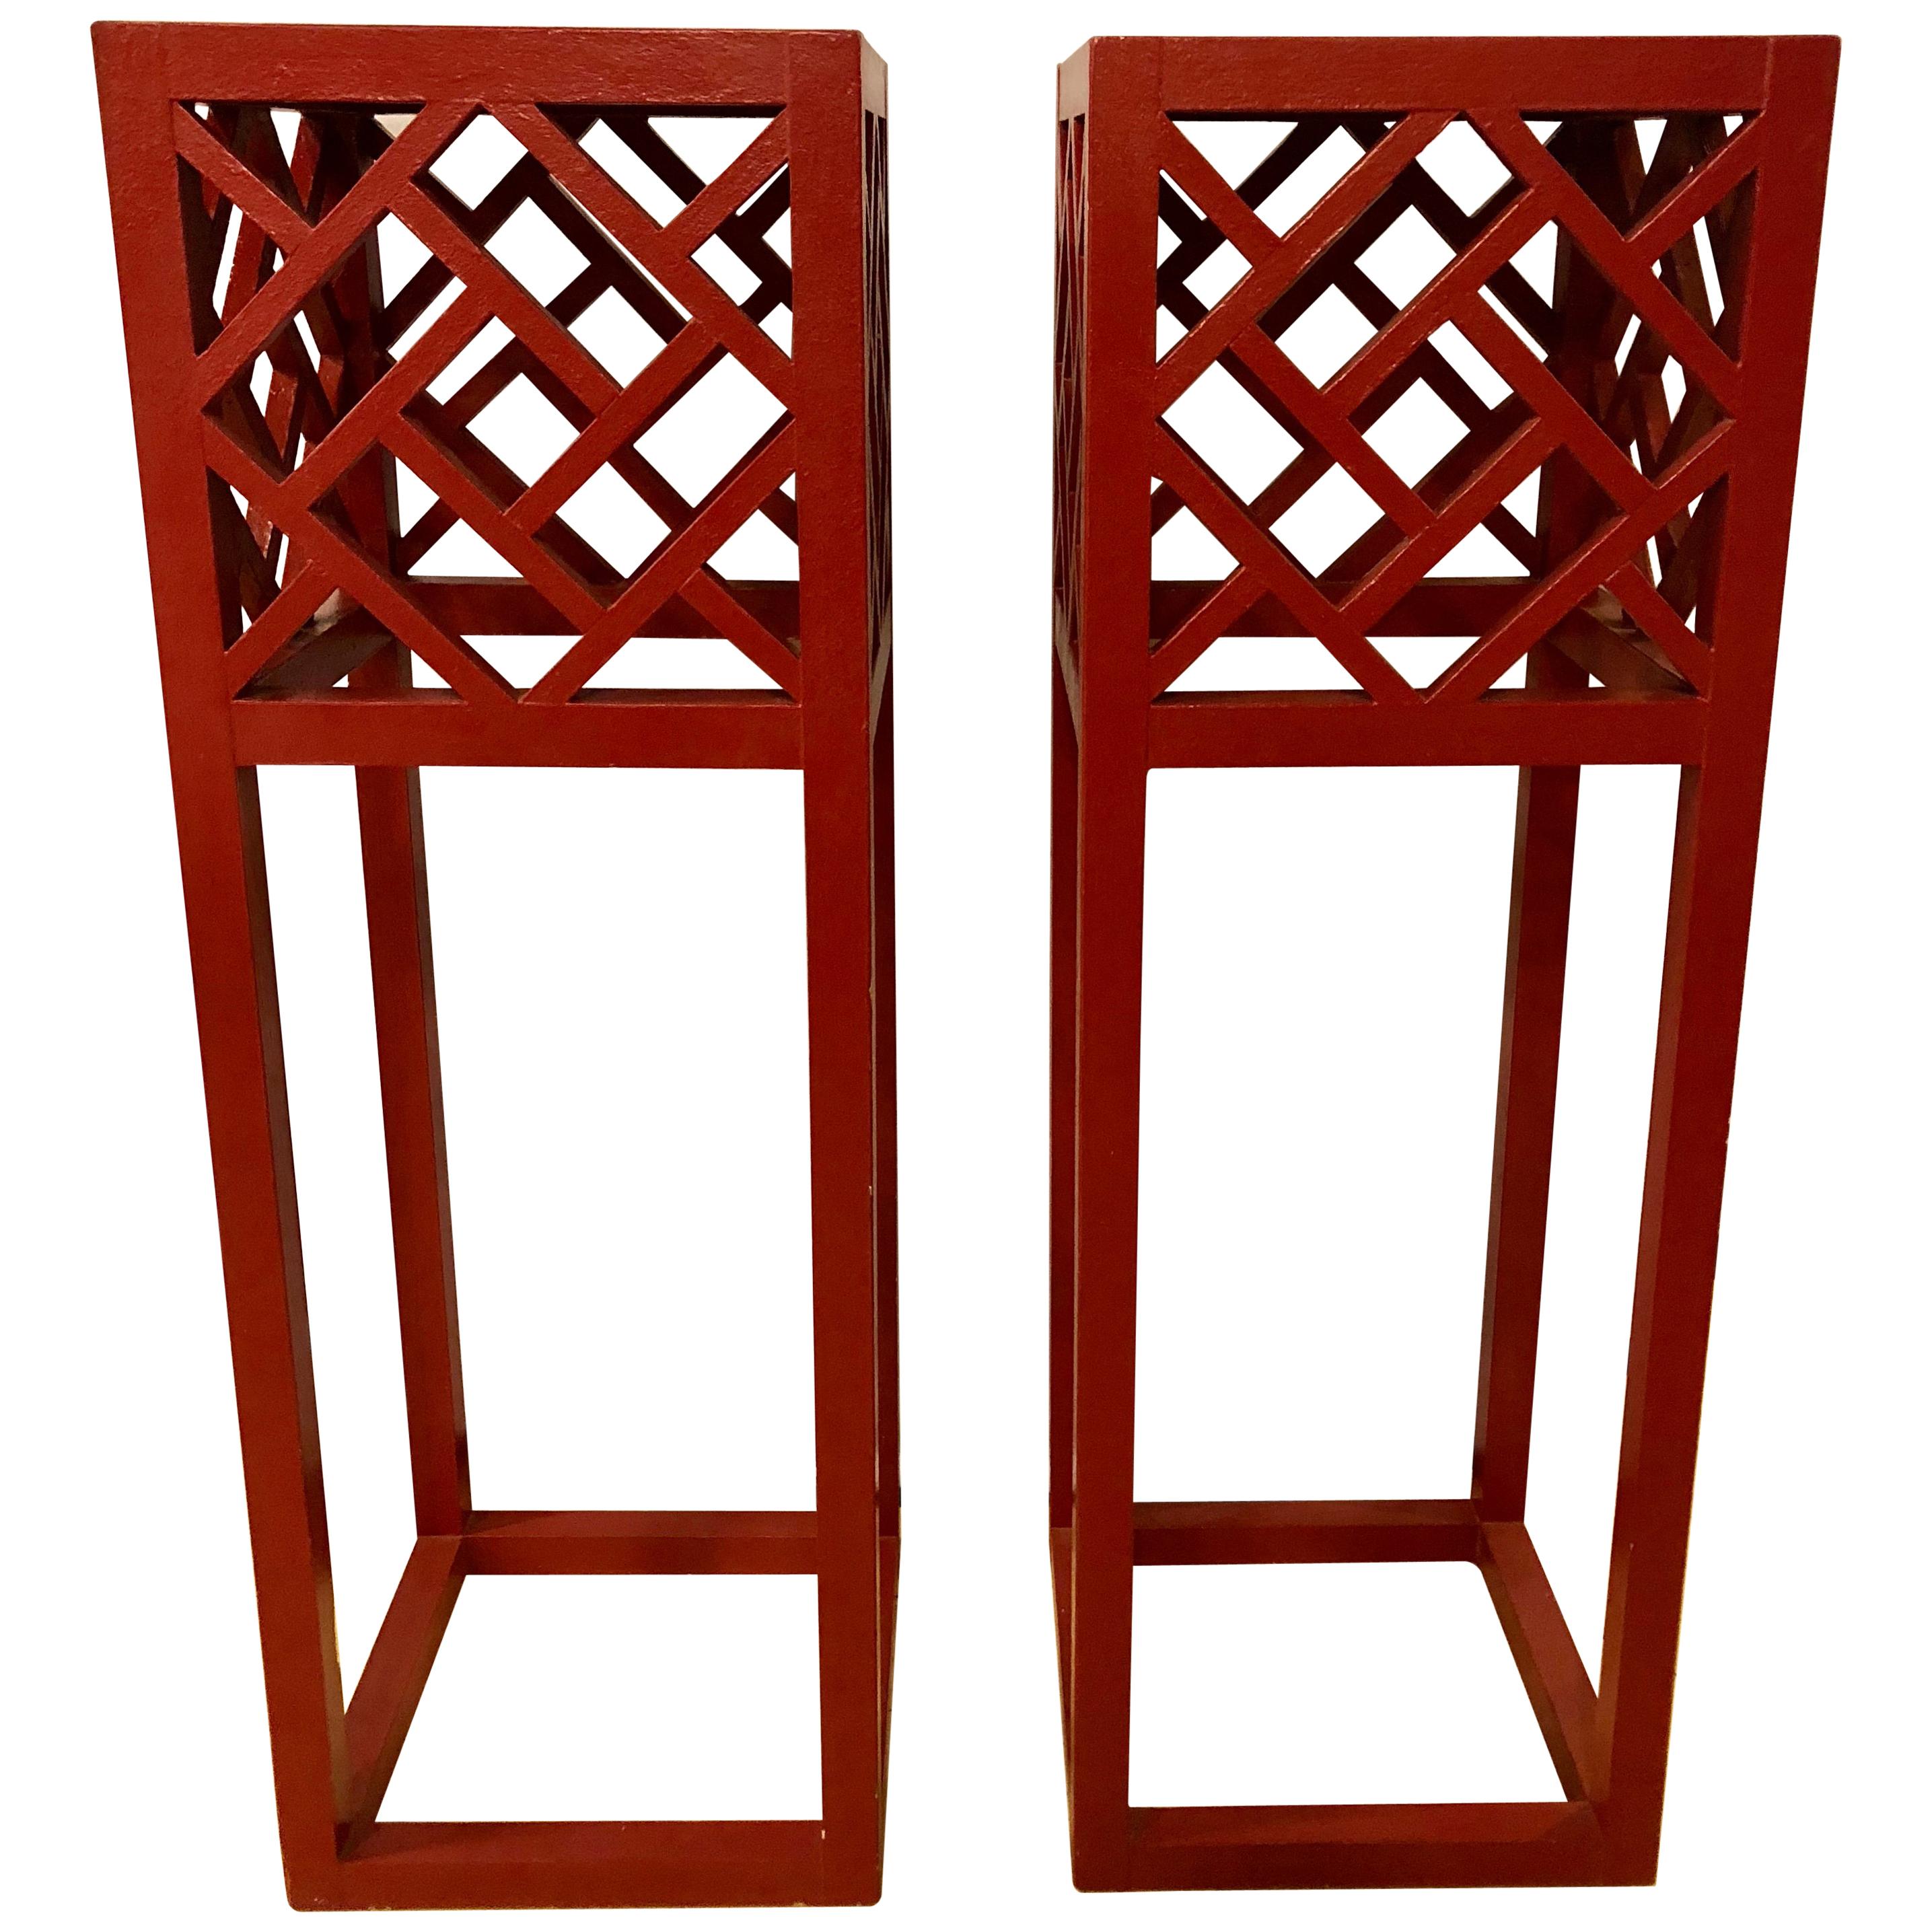 Pair of Tall Red Painted Asian Inspired Standing Pedestals